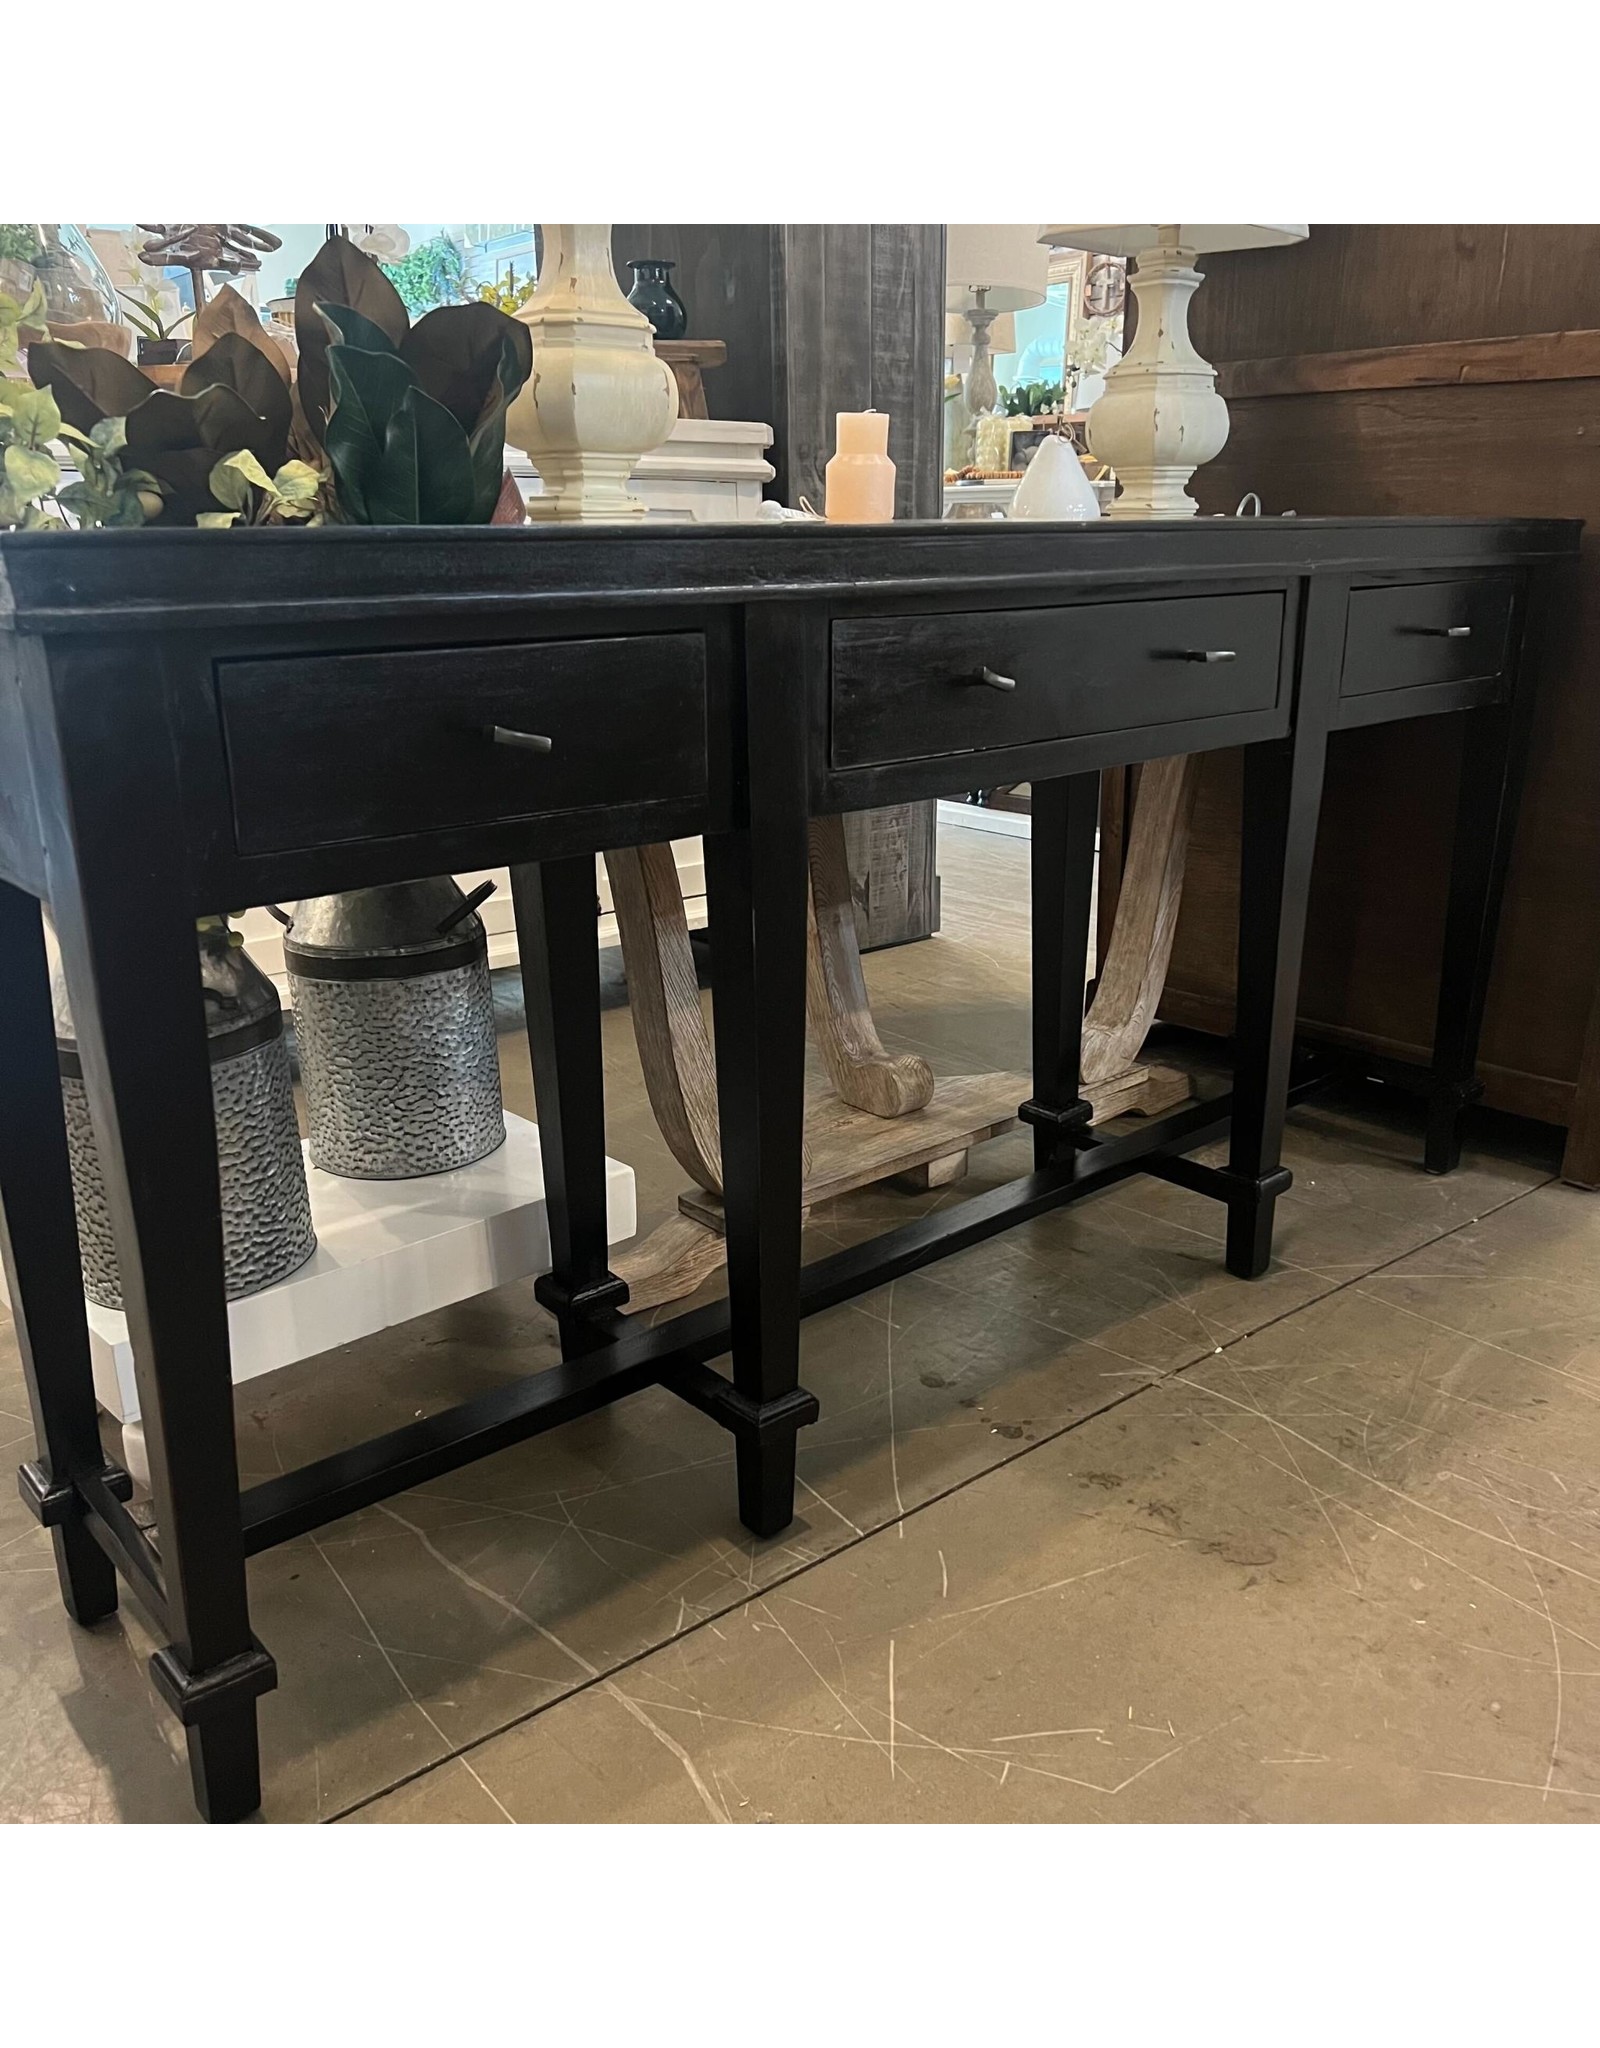 TAB359 Console Table 3DRW 68.1x14.1x31.8"H